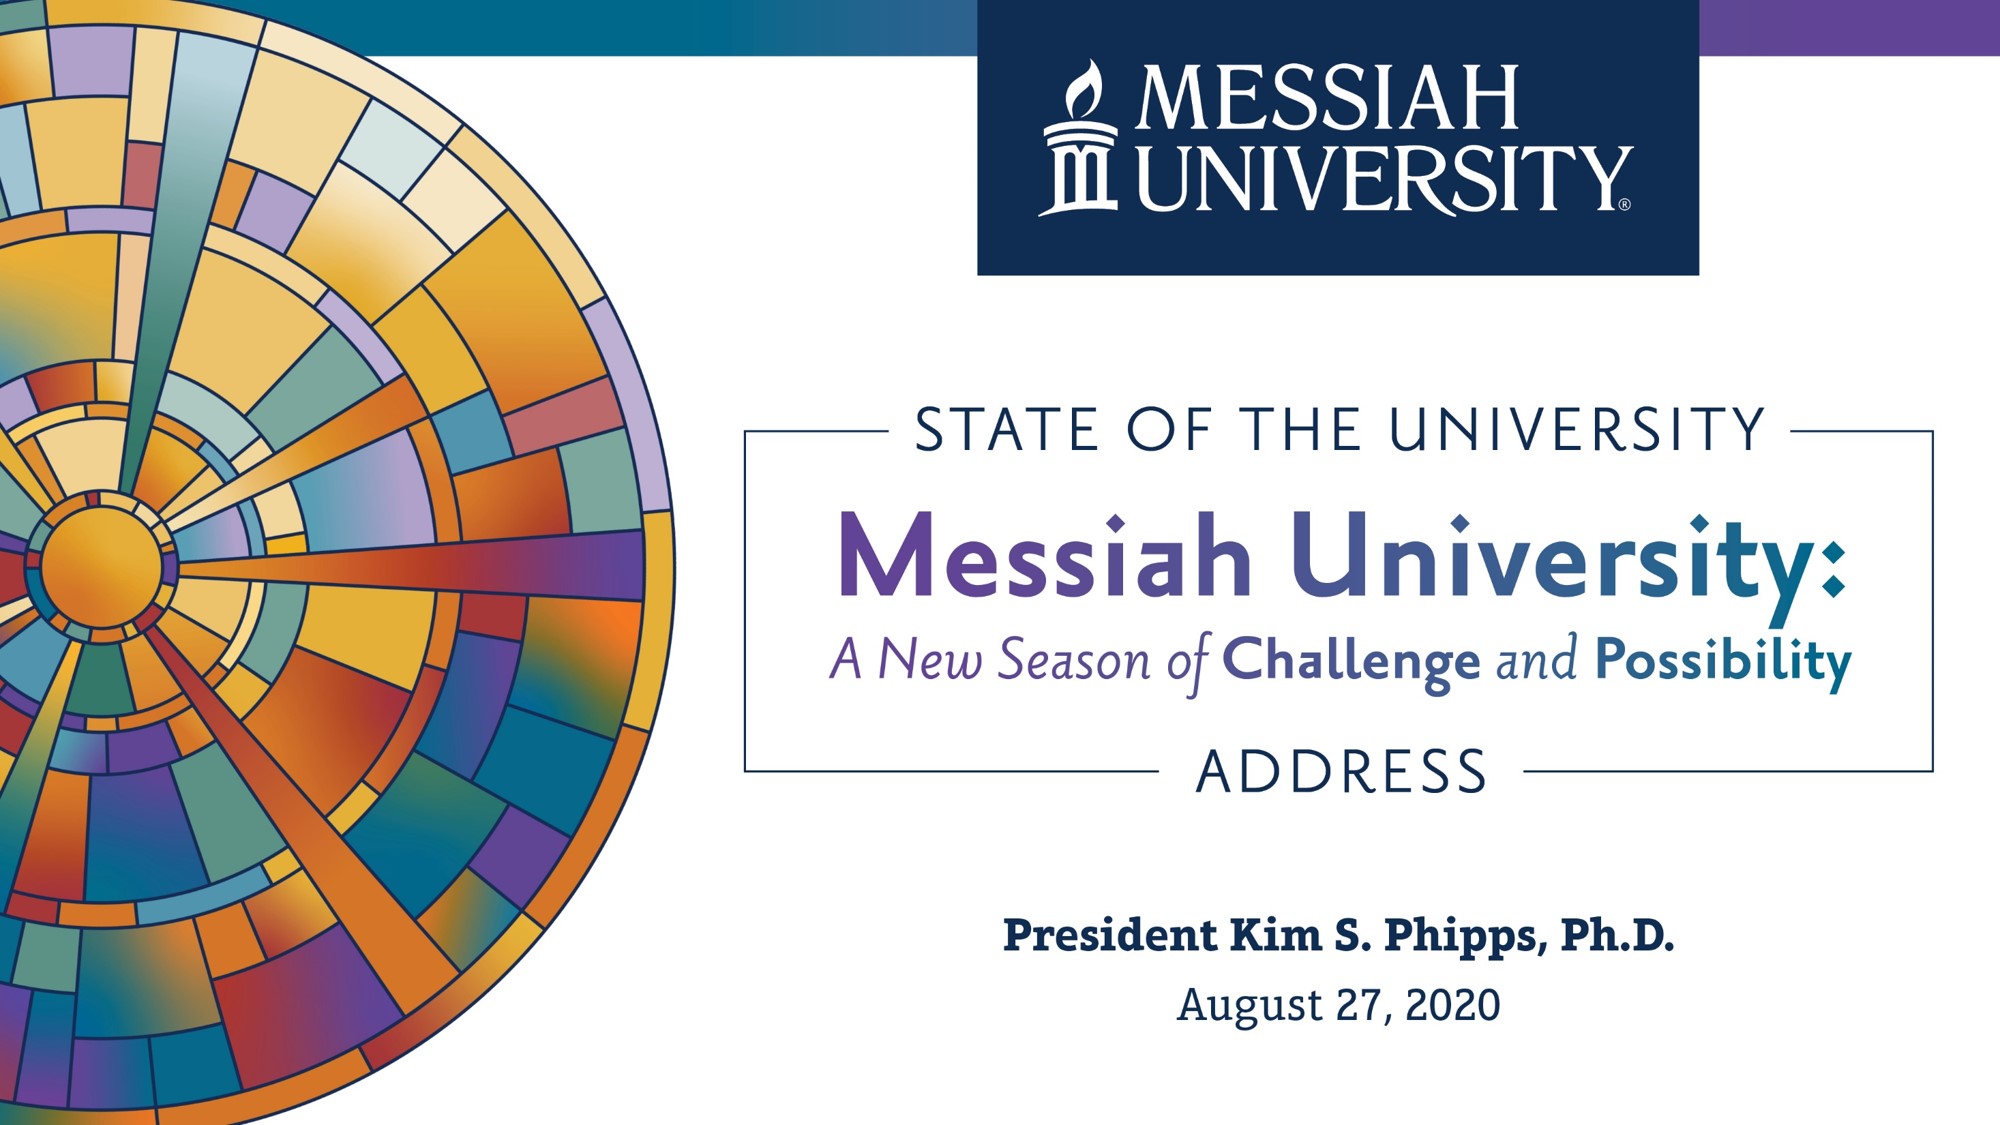 Messiah University: A New Season of Challenge and Possibility